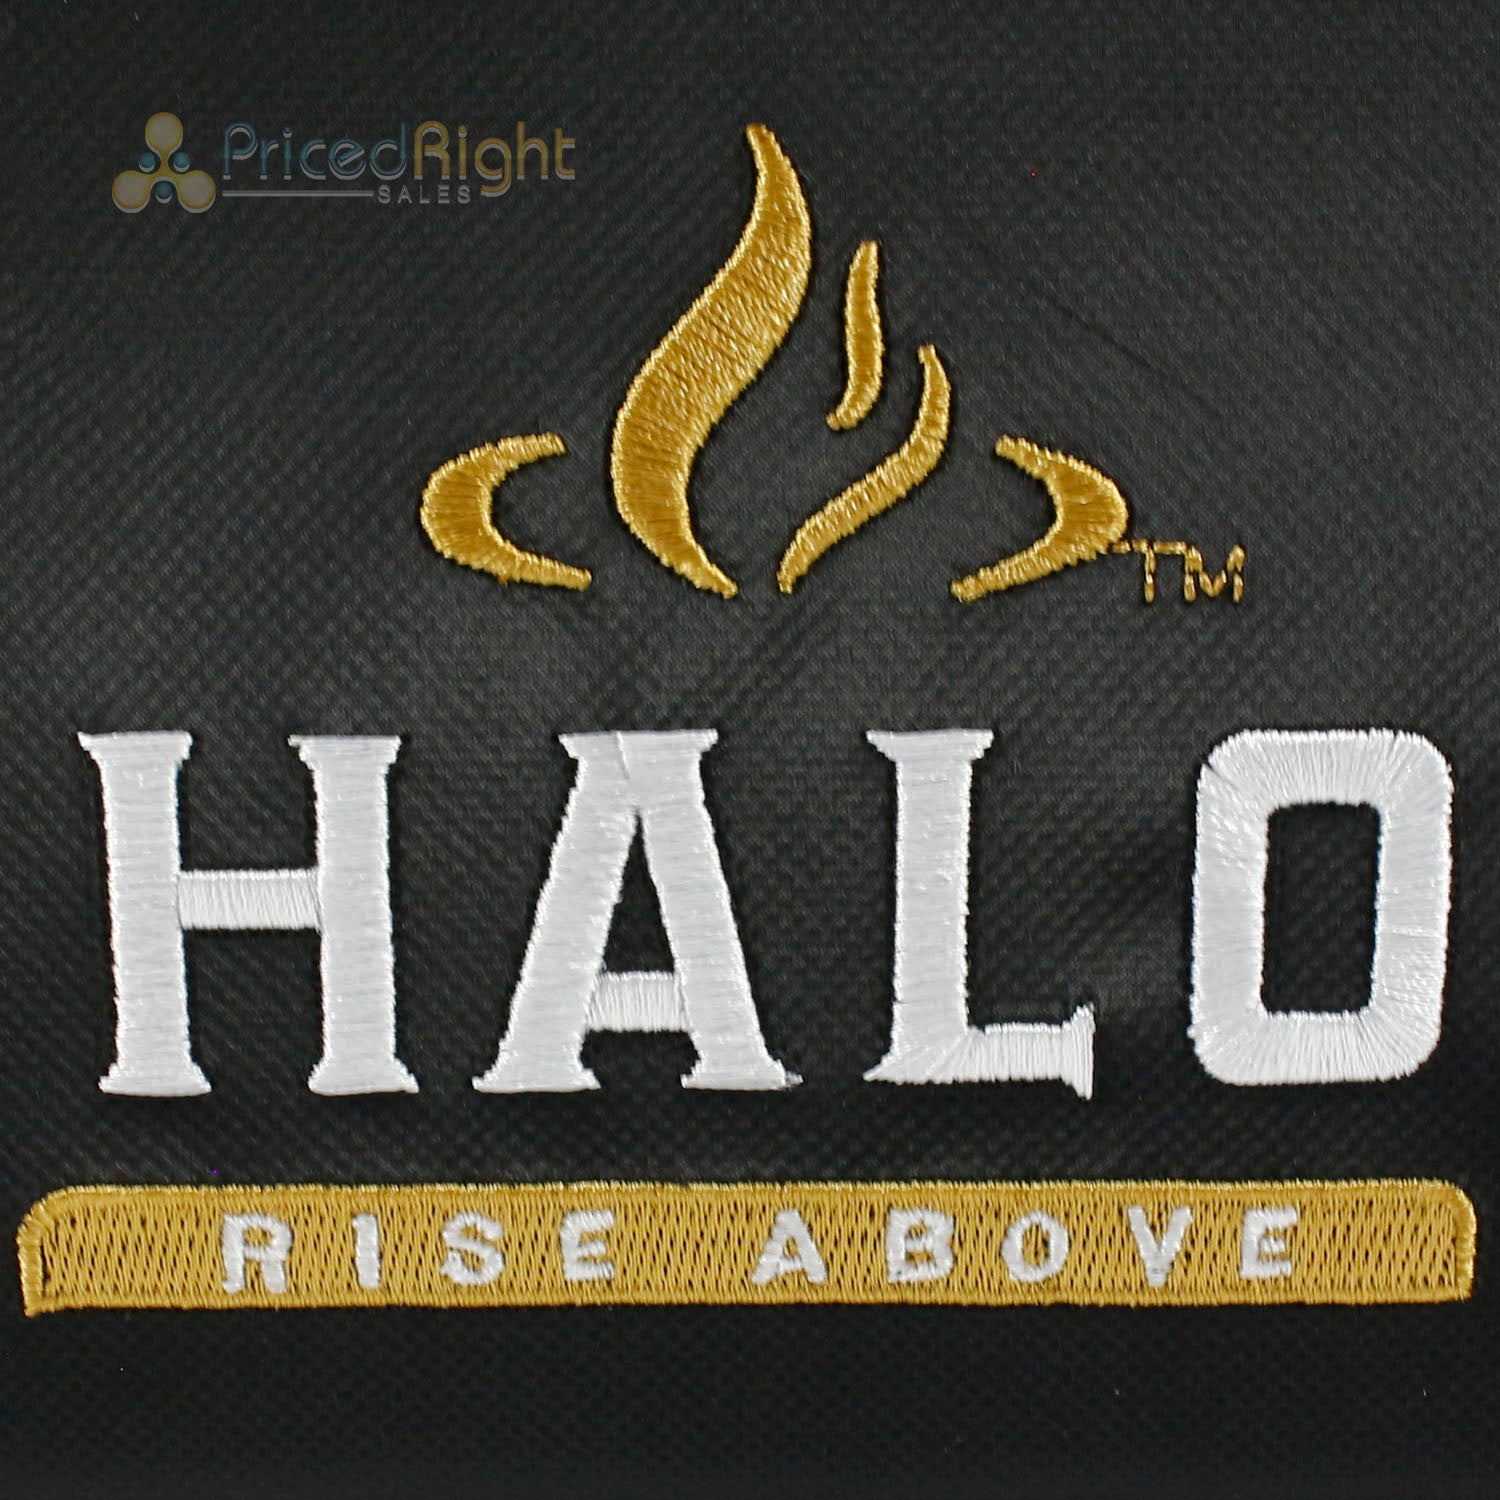 Halo Prime 1500 Pellet Grill Protective Cover Weather Proof Custom Fit Black